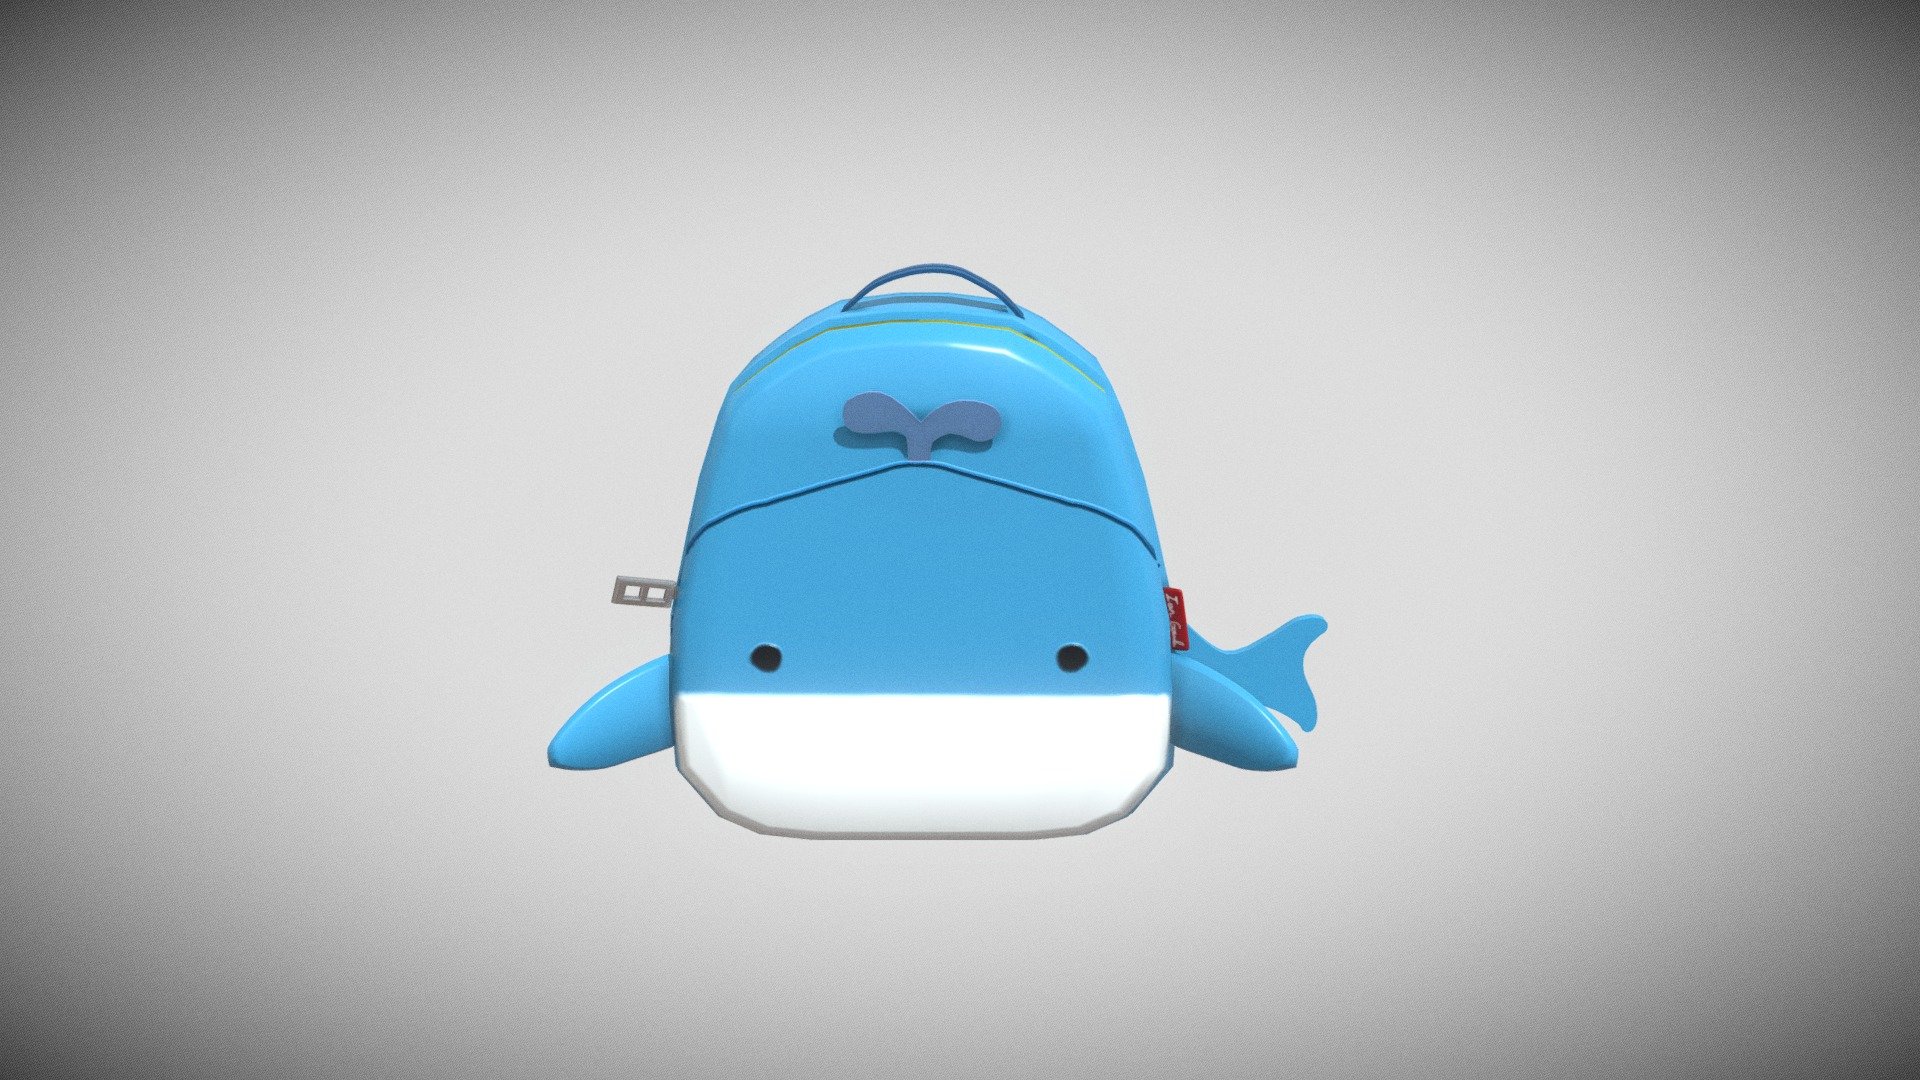 A common whale backpack for kids 3d model